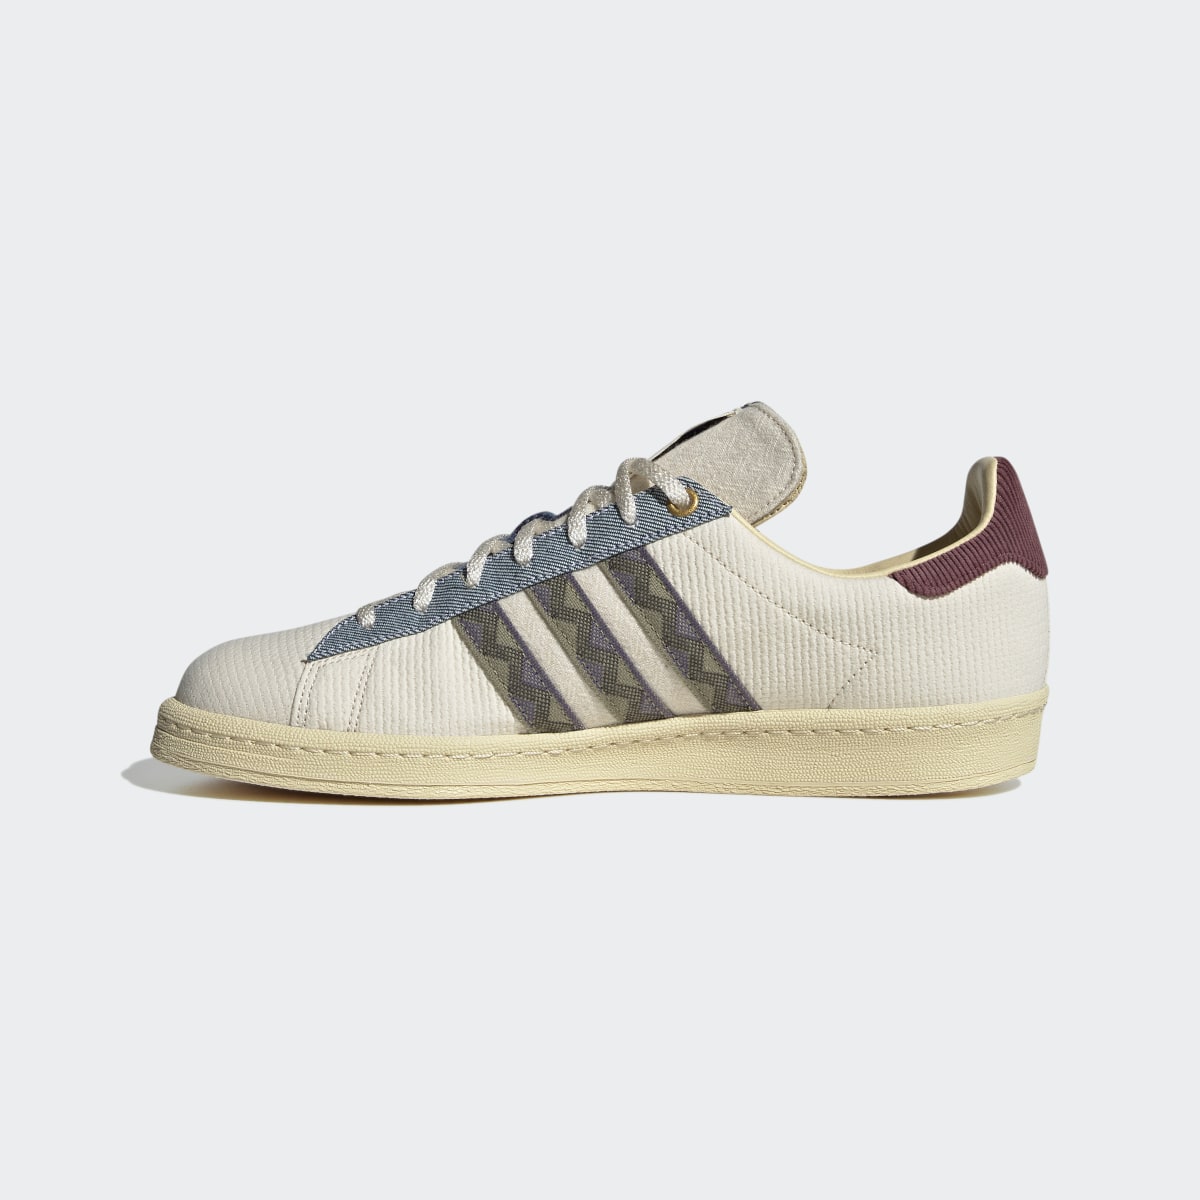 Adidas Campus 80s Shoes. 7